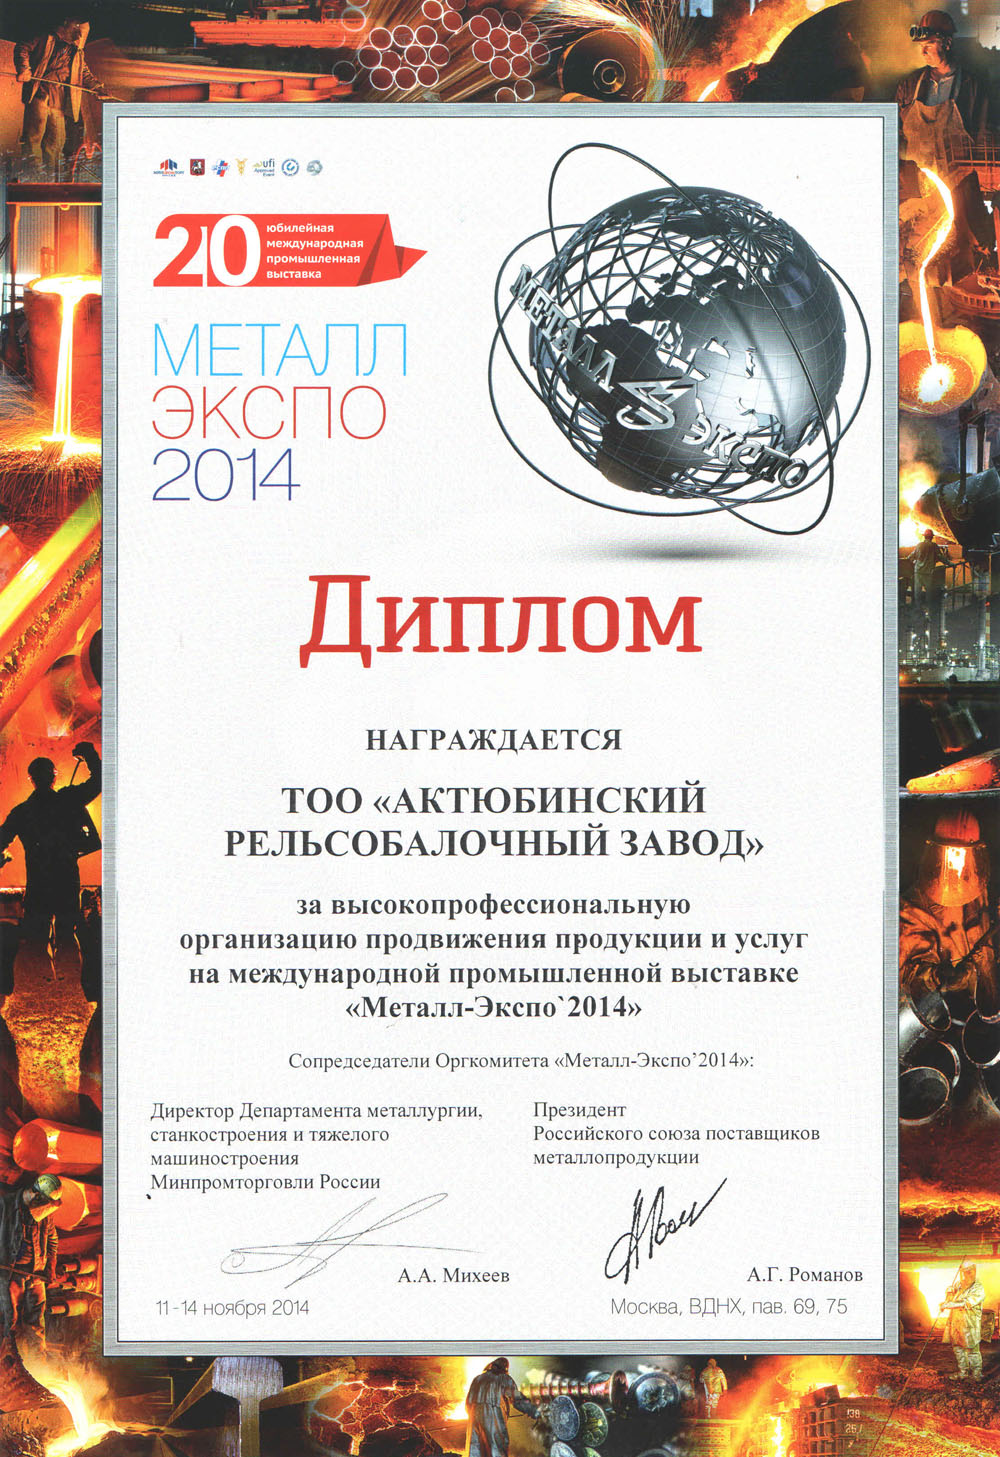 20th International Industrial Exhibition Metal-Expo 2014